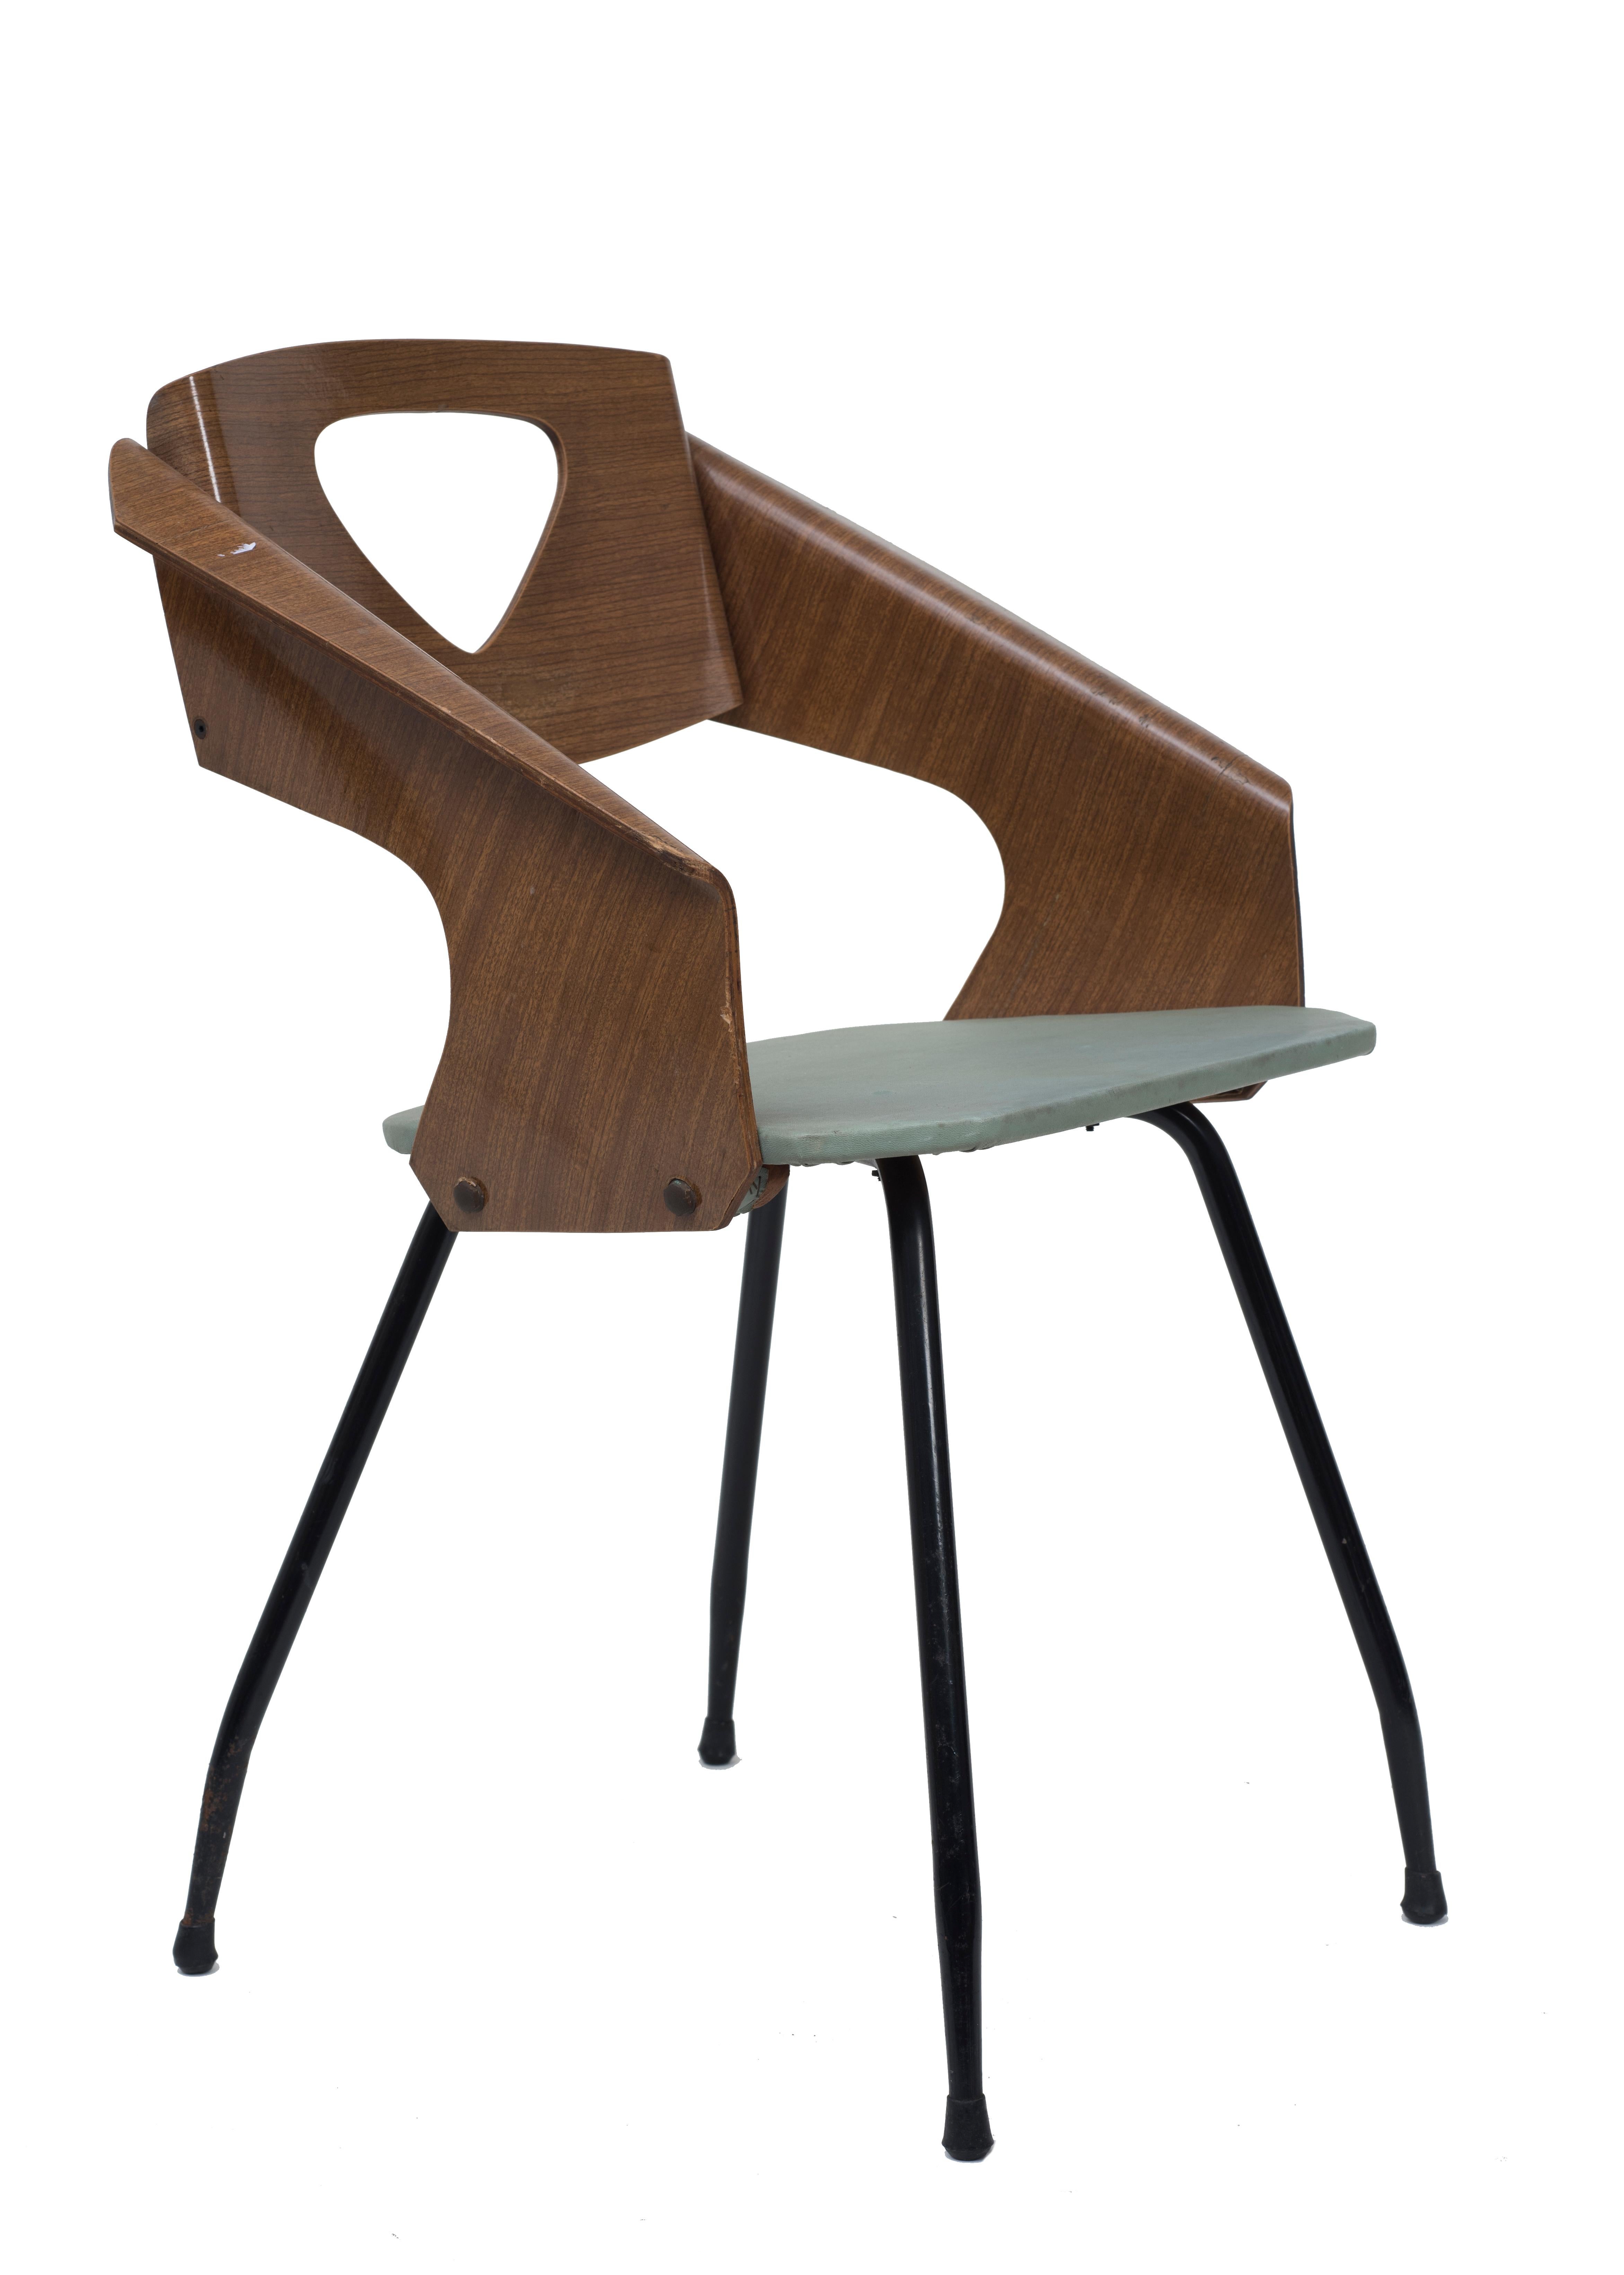 Mid-20th Century Six Chairs by Carlo Ratti - 1950s For Sale